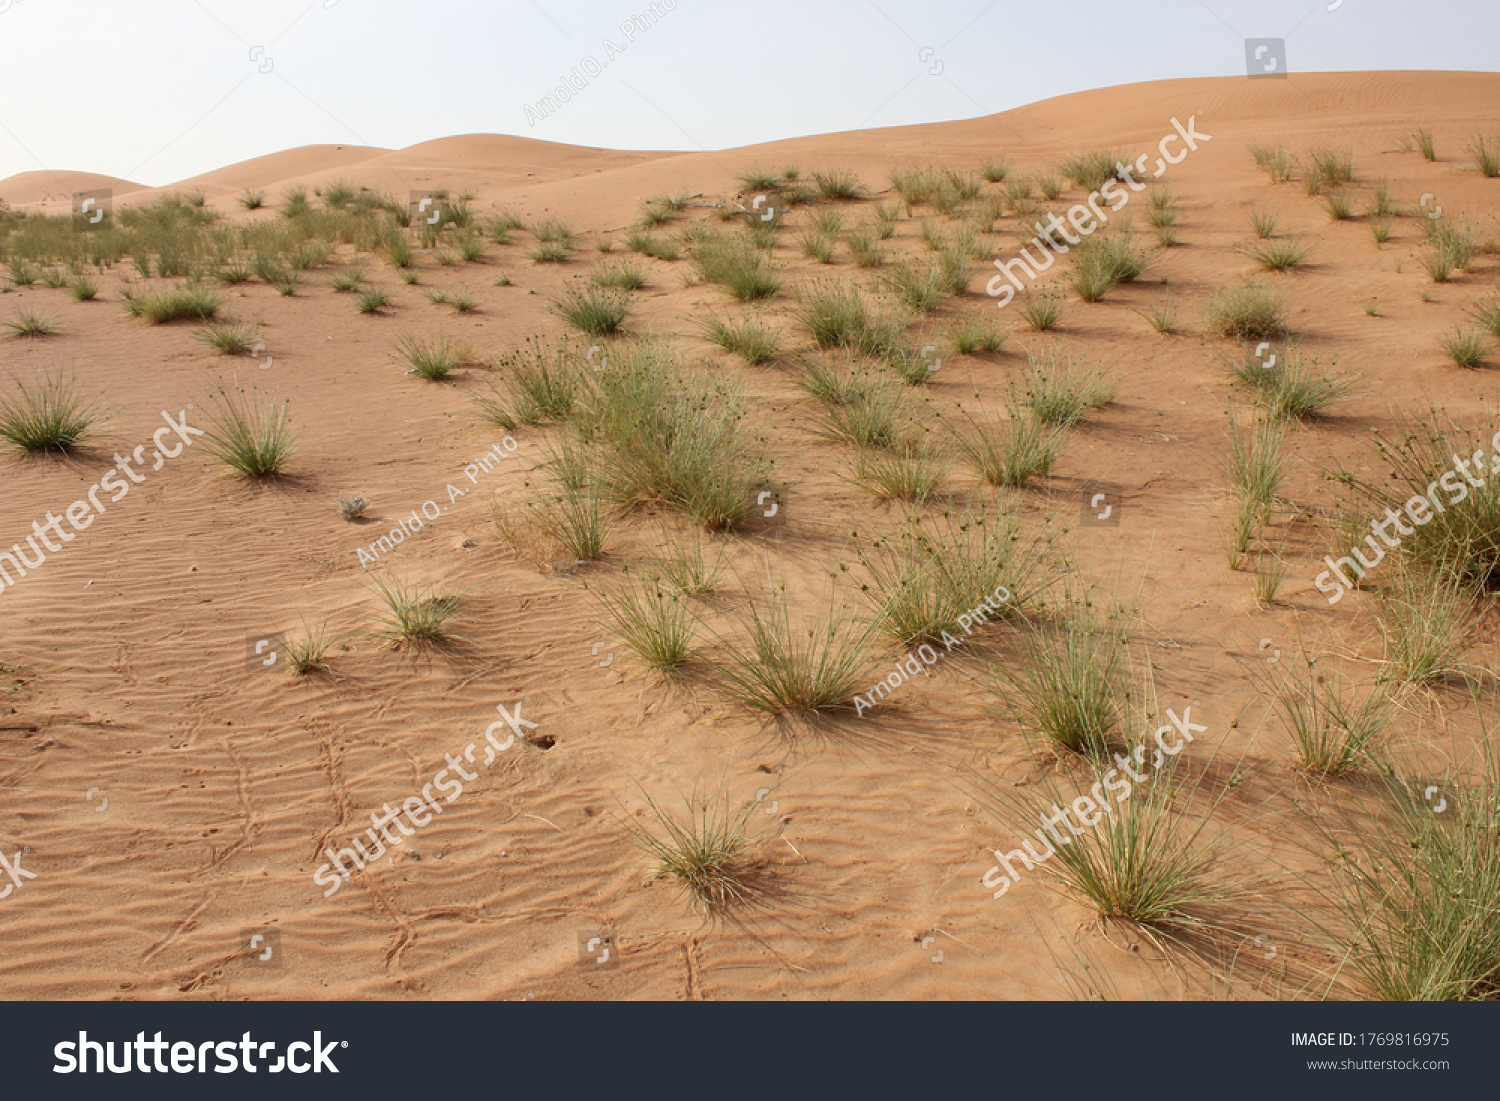 Desert sand dunes ecology/ecosystem in the United Arab Emirates, Middle East. Wind action constantly changes the dimensions and color texture of the beautiful and inhospitable sand dunes. #1769816975